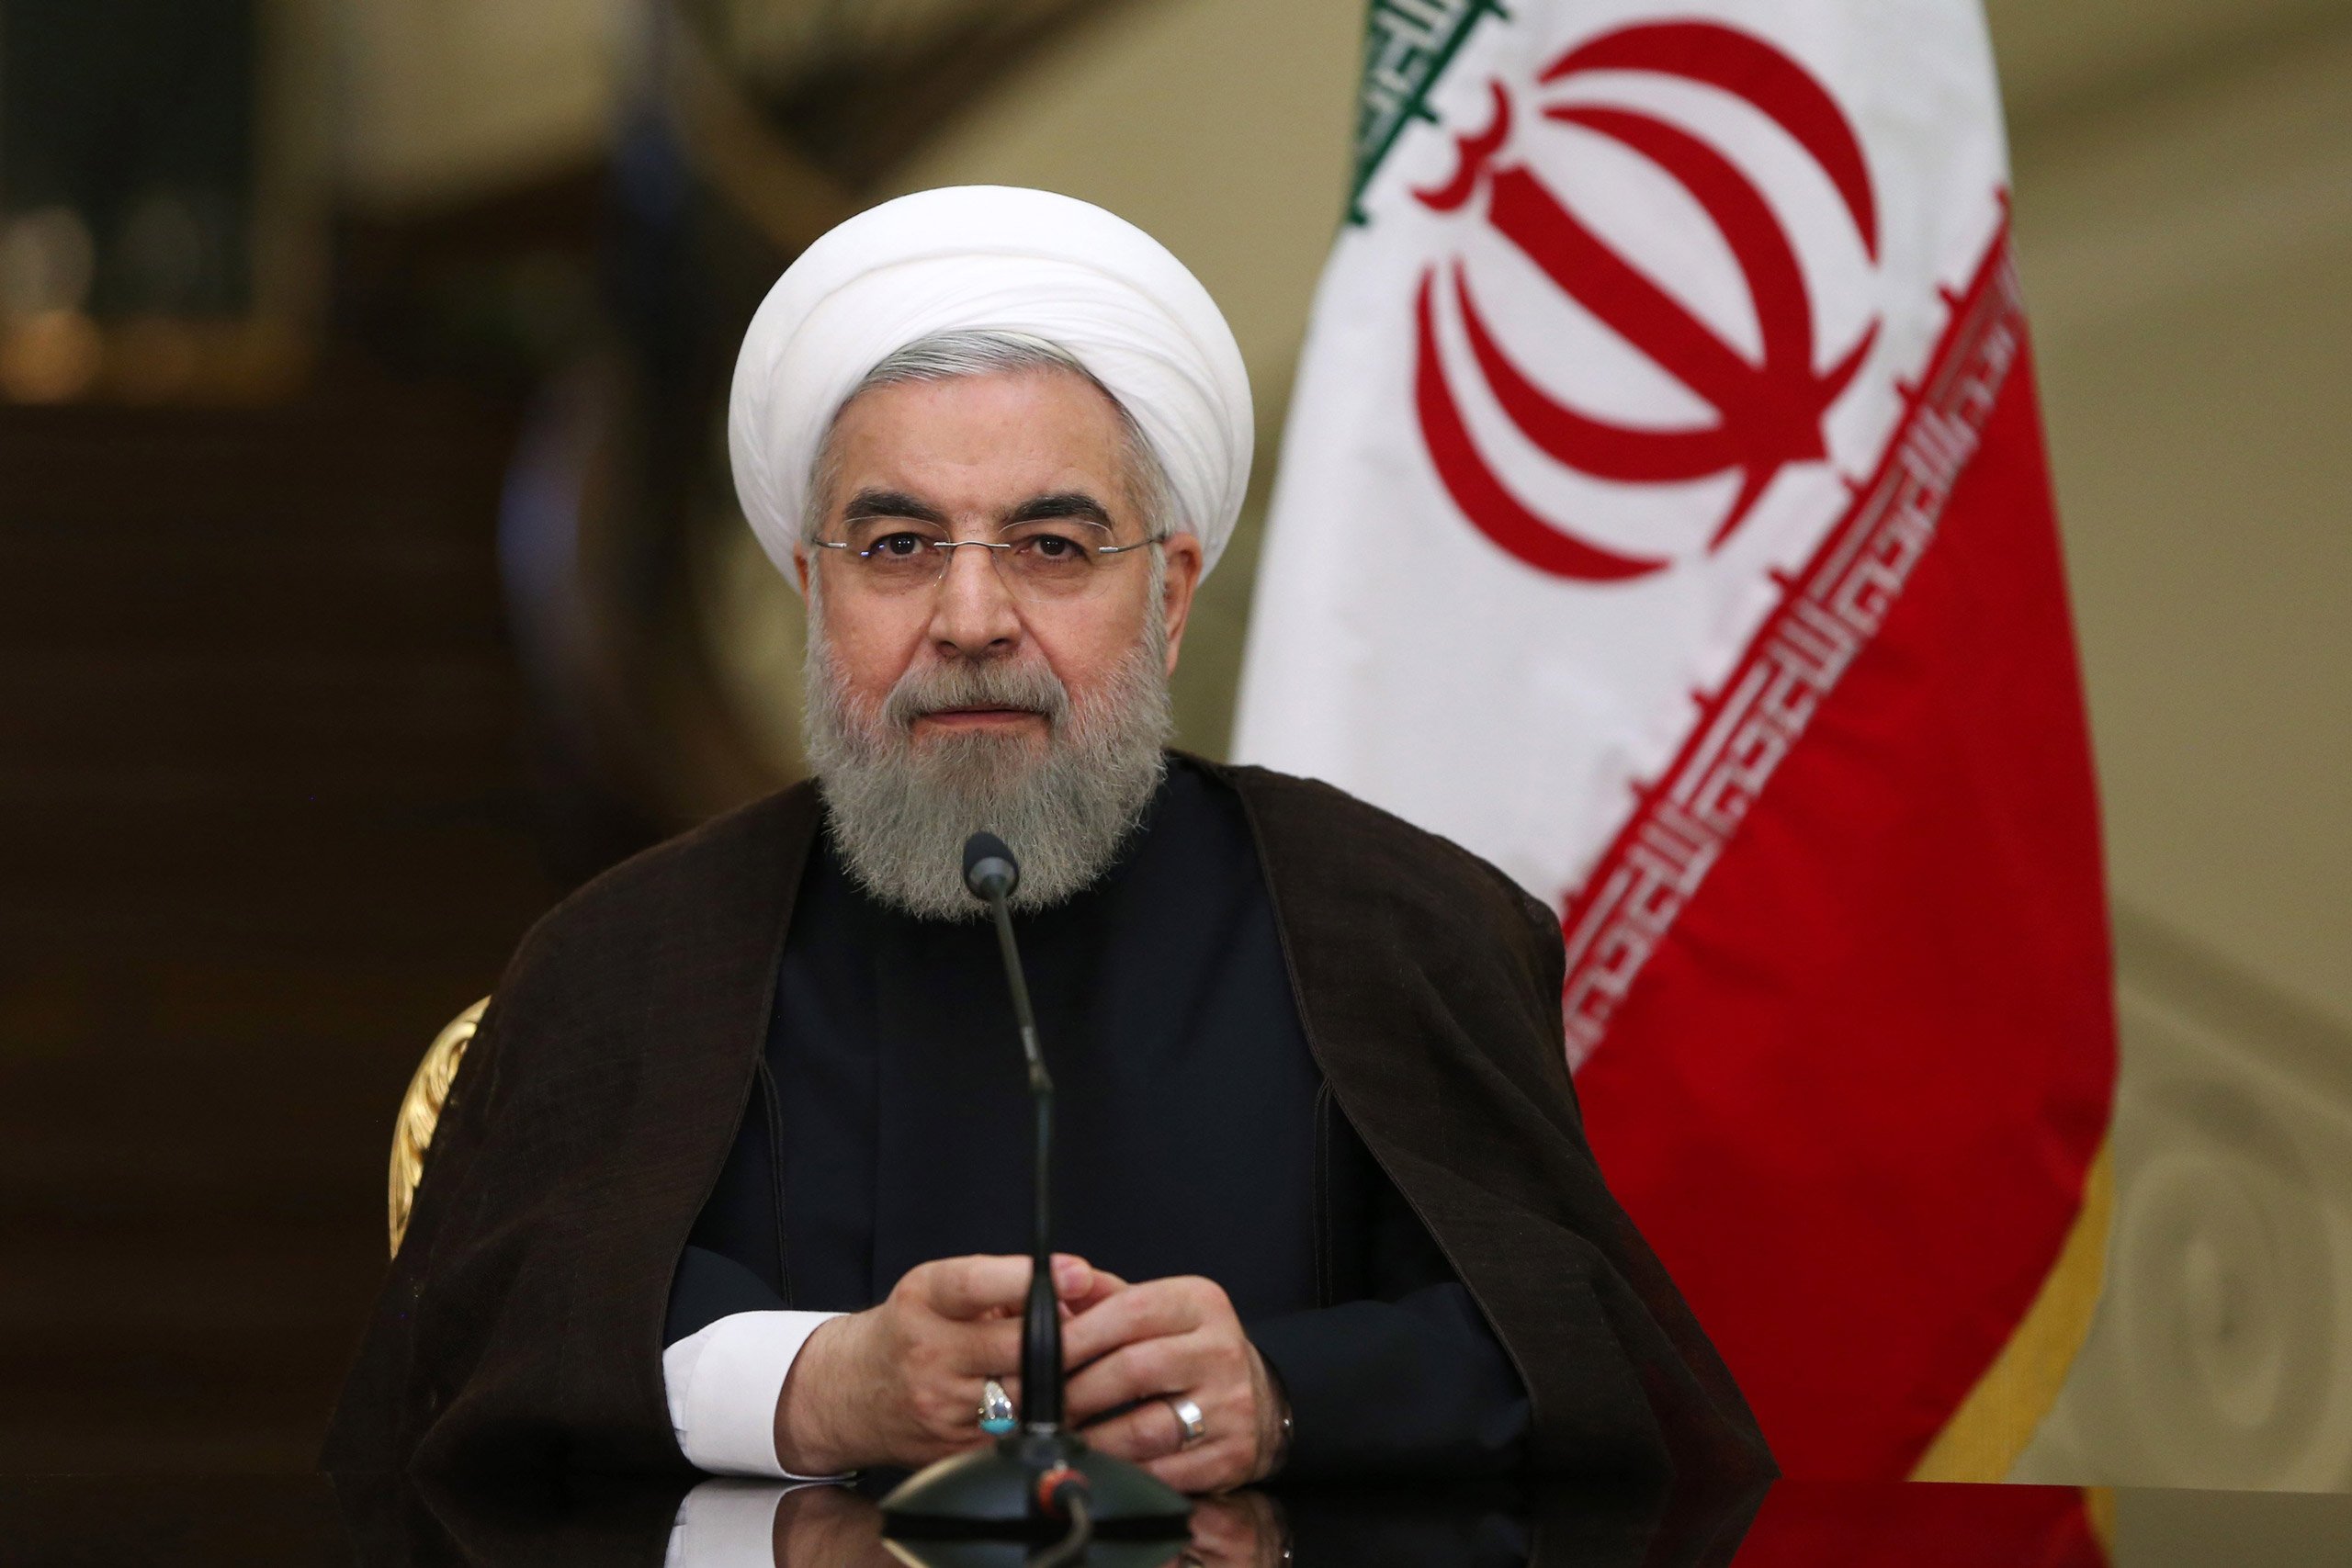 Why did Rouhani Vow to Increase Iran’s Missile Production?